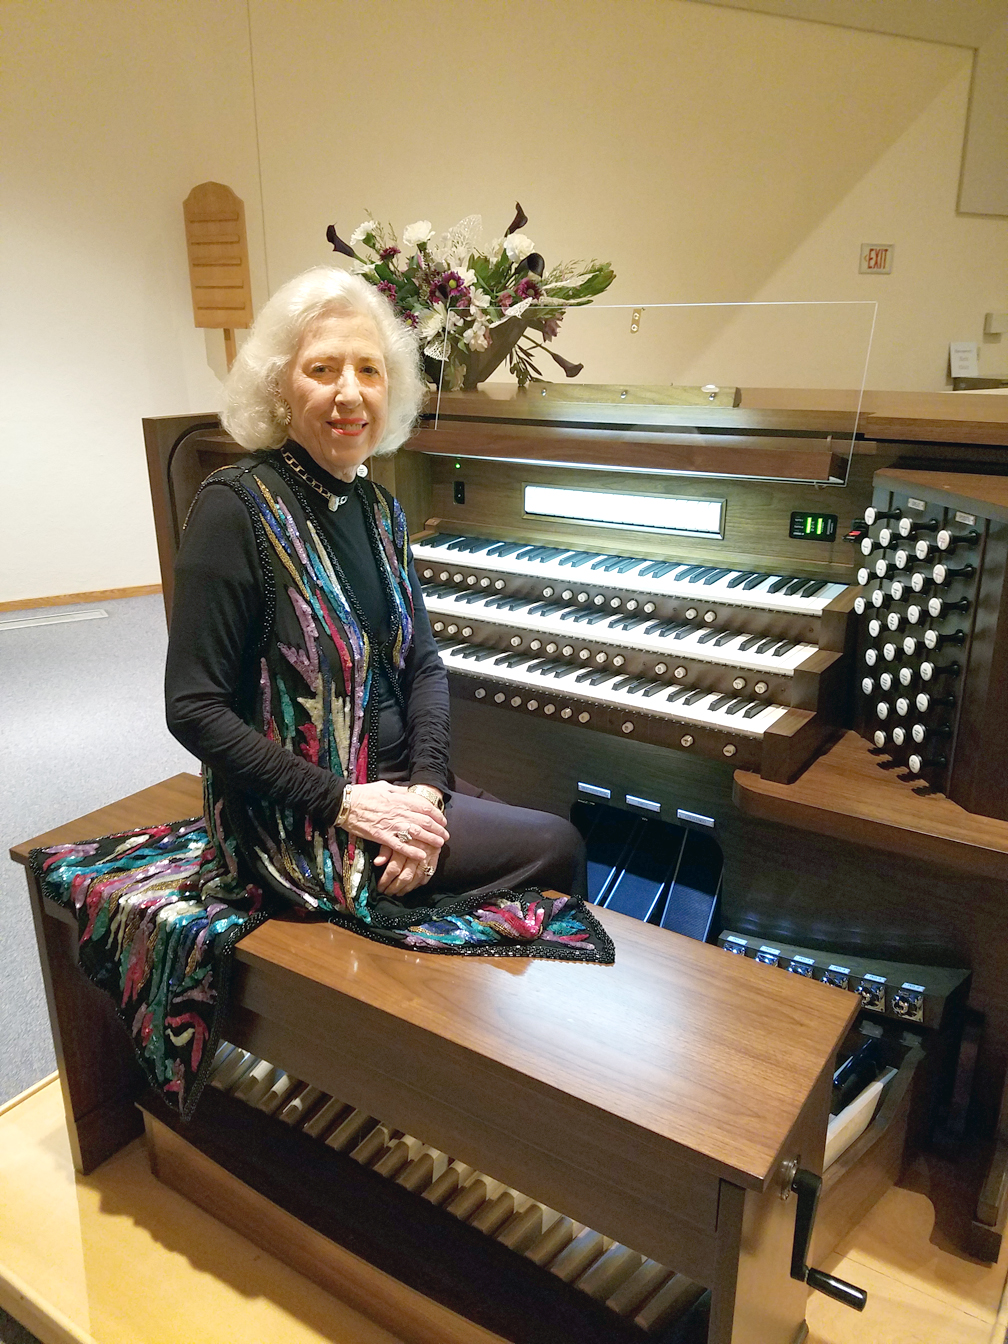 St. Mary's Catholic Church, St. Clairsville, OH - Diane Bish on an Allen 58 Stop Digital Organ